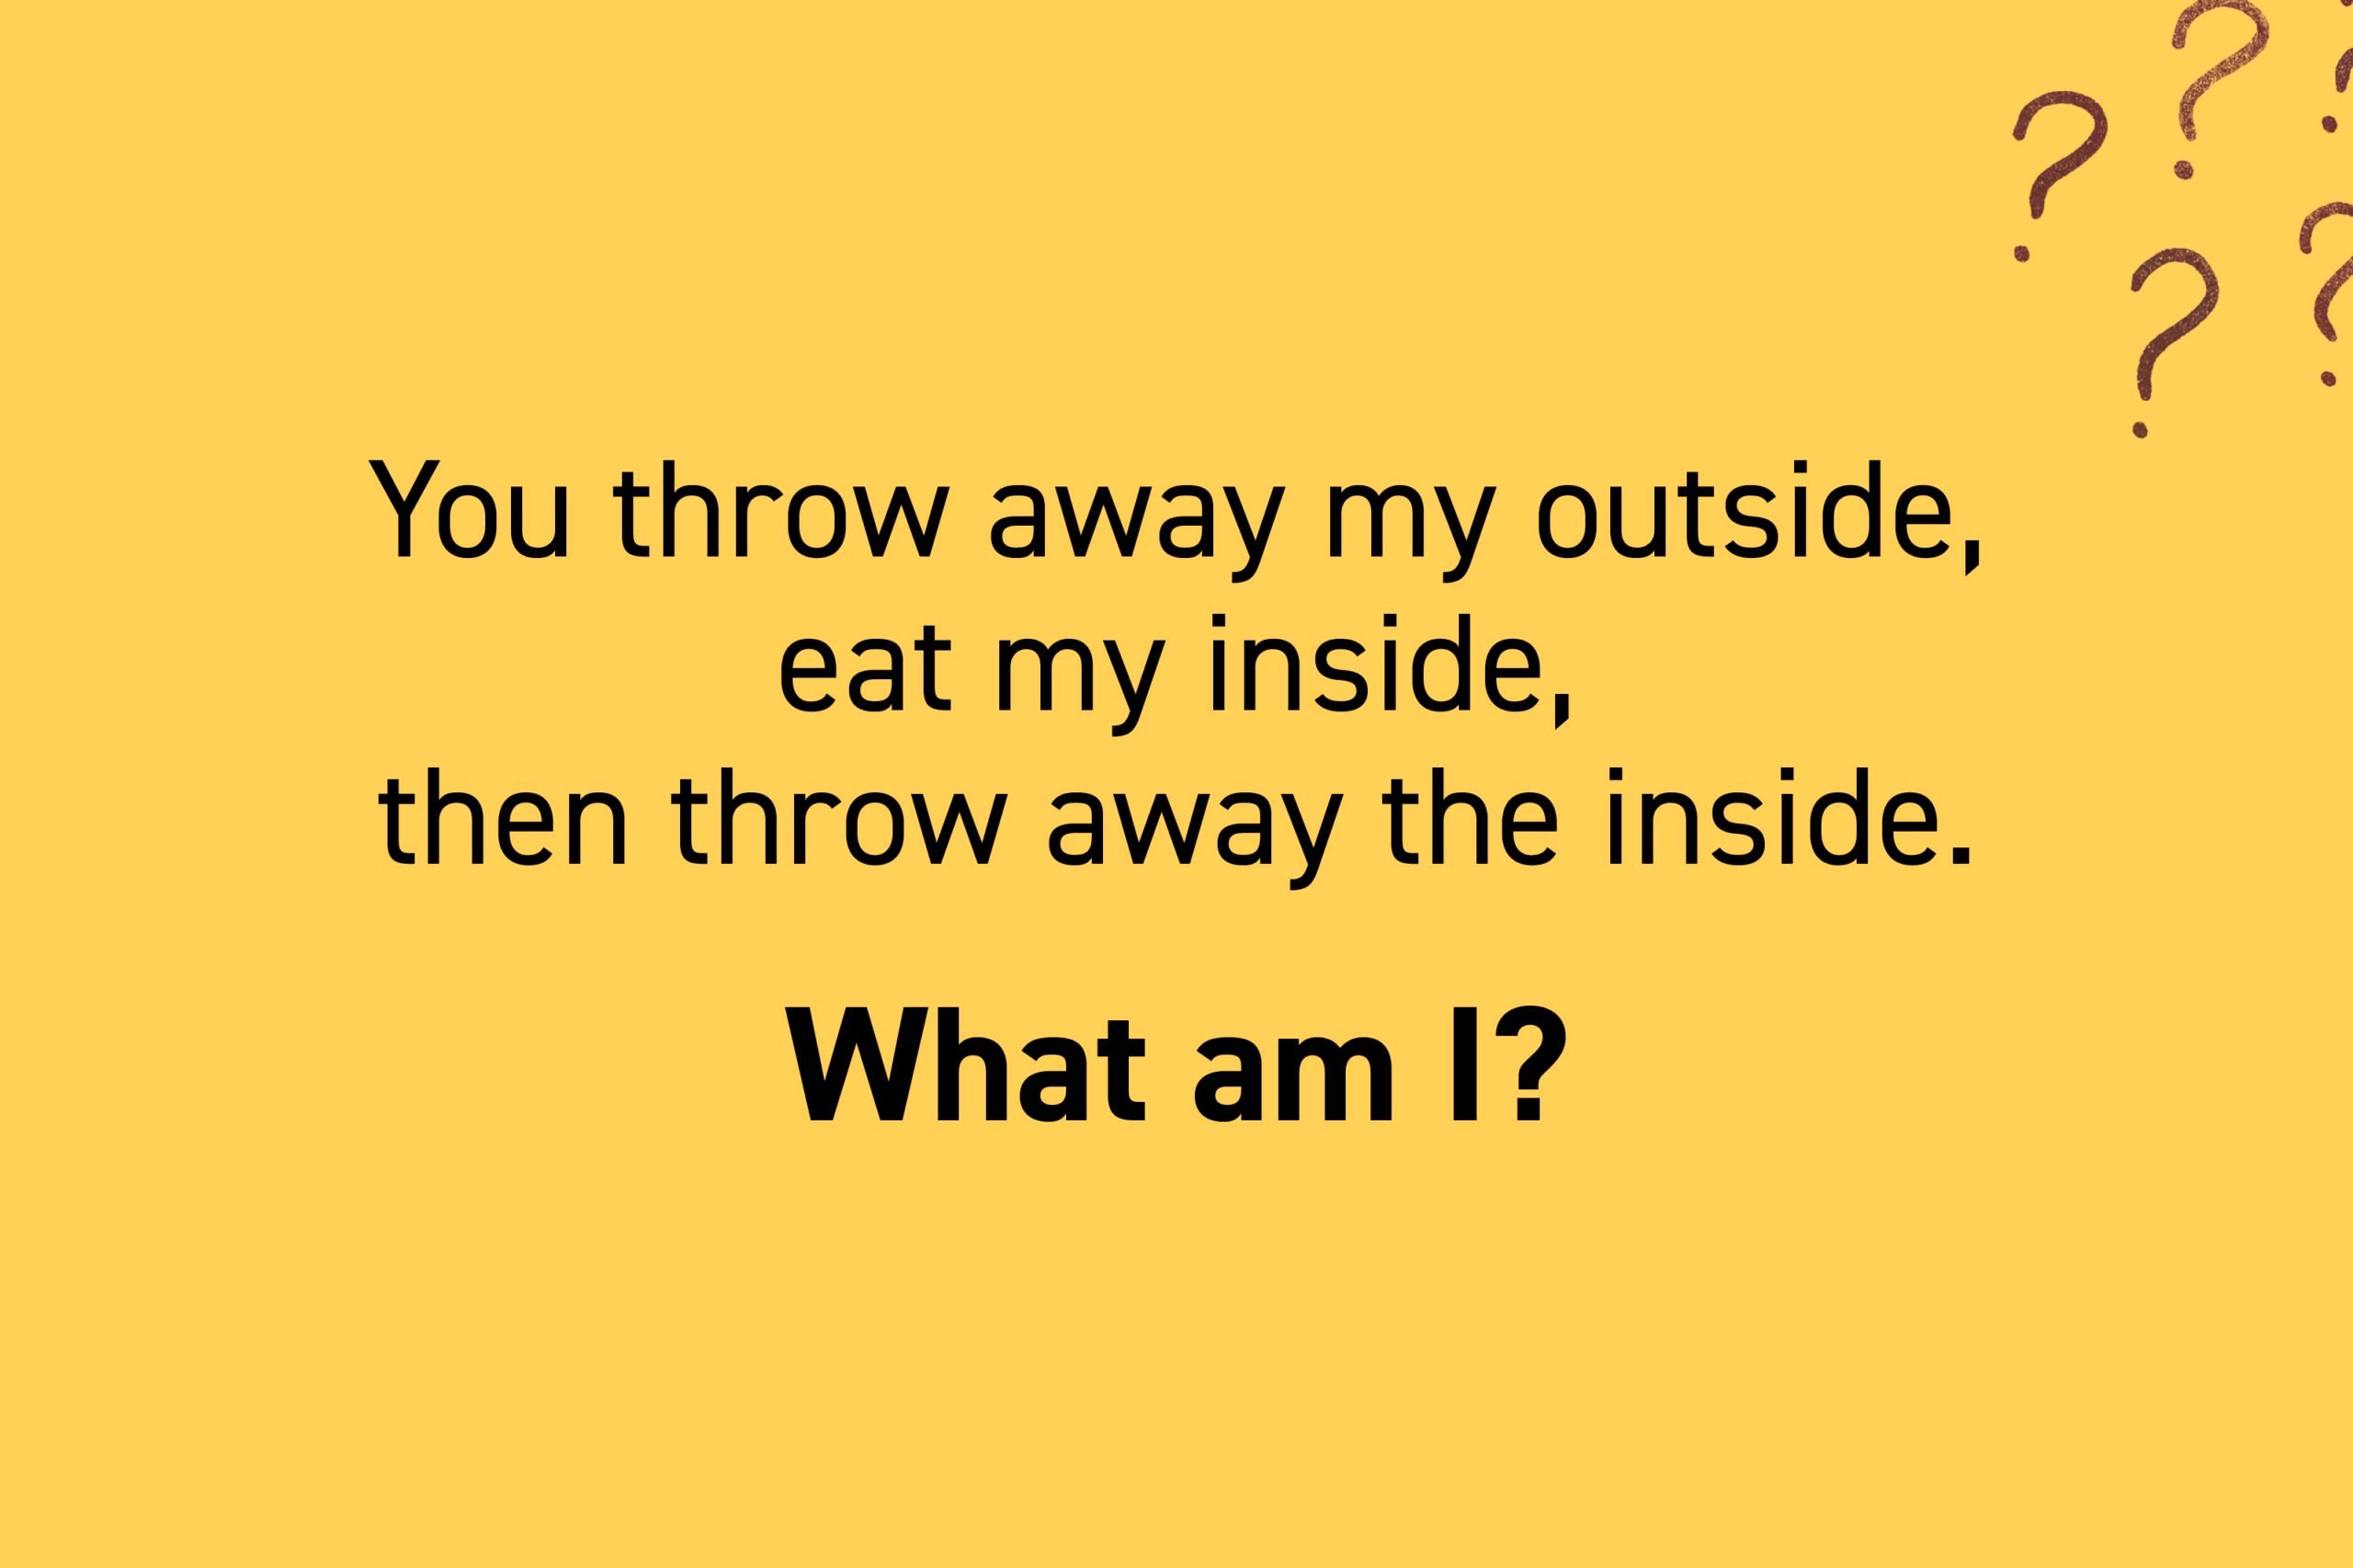 You throw away my outside, eat my inside, then throw away the inside. What am I?